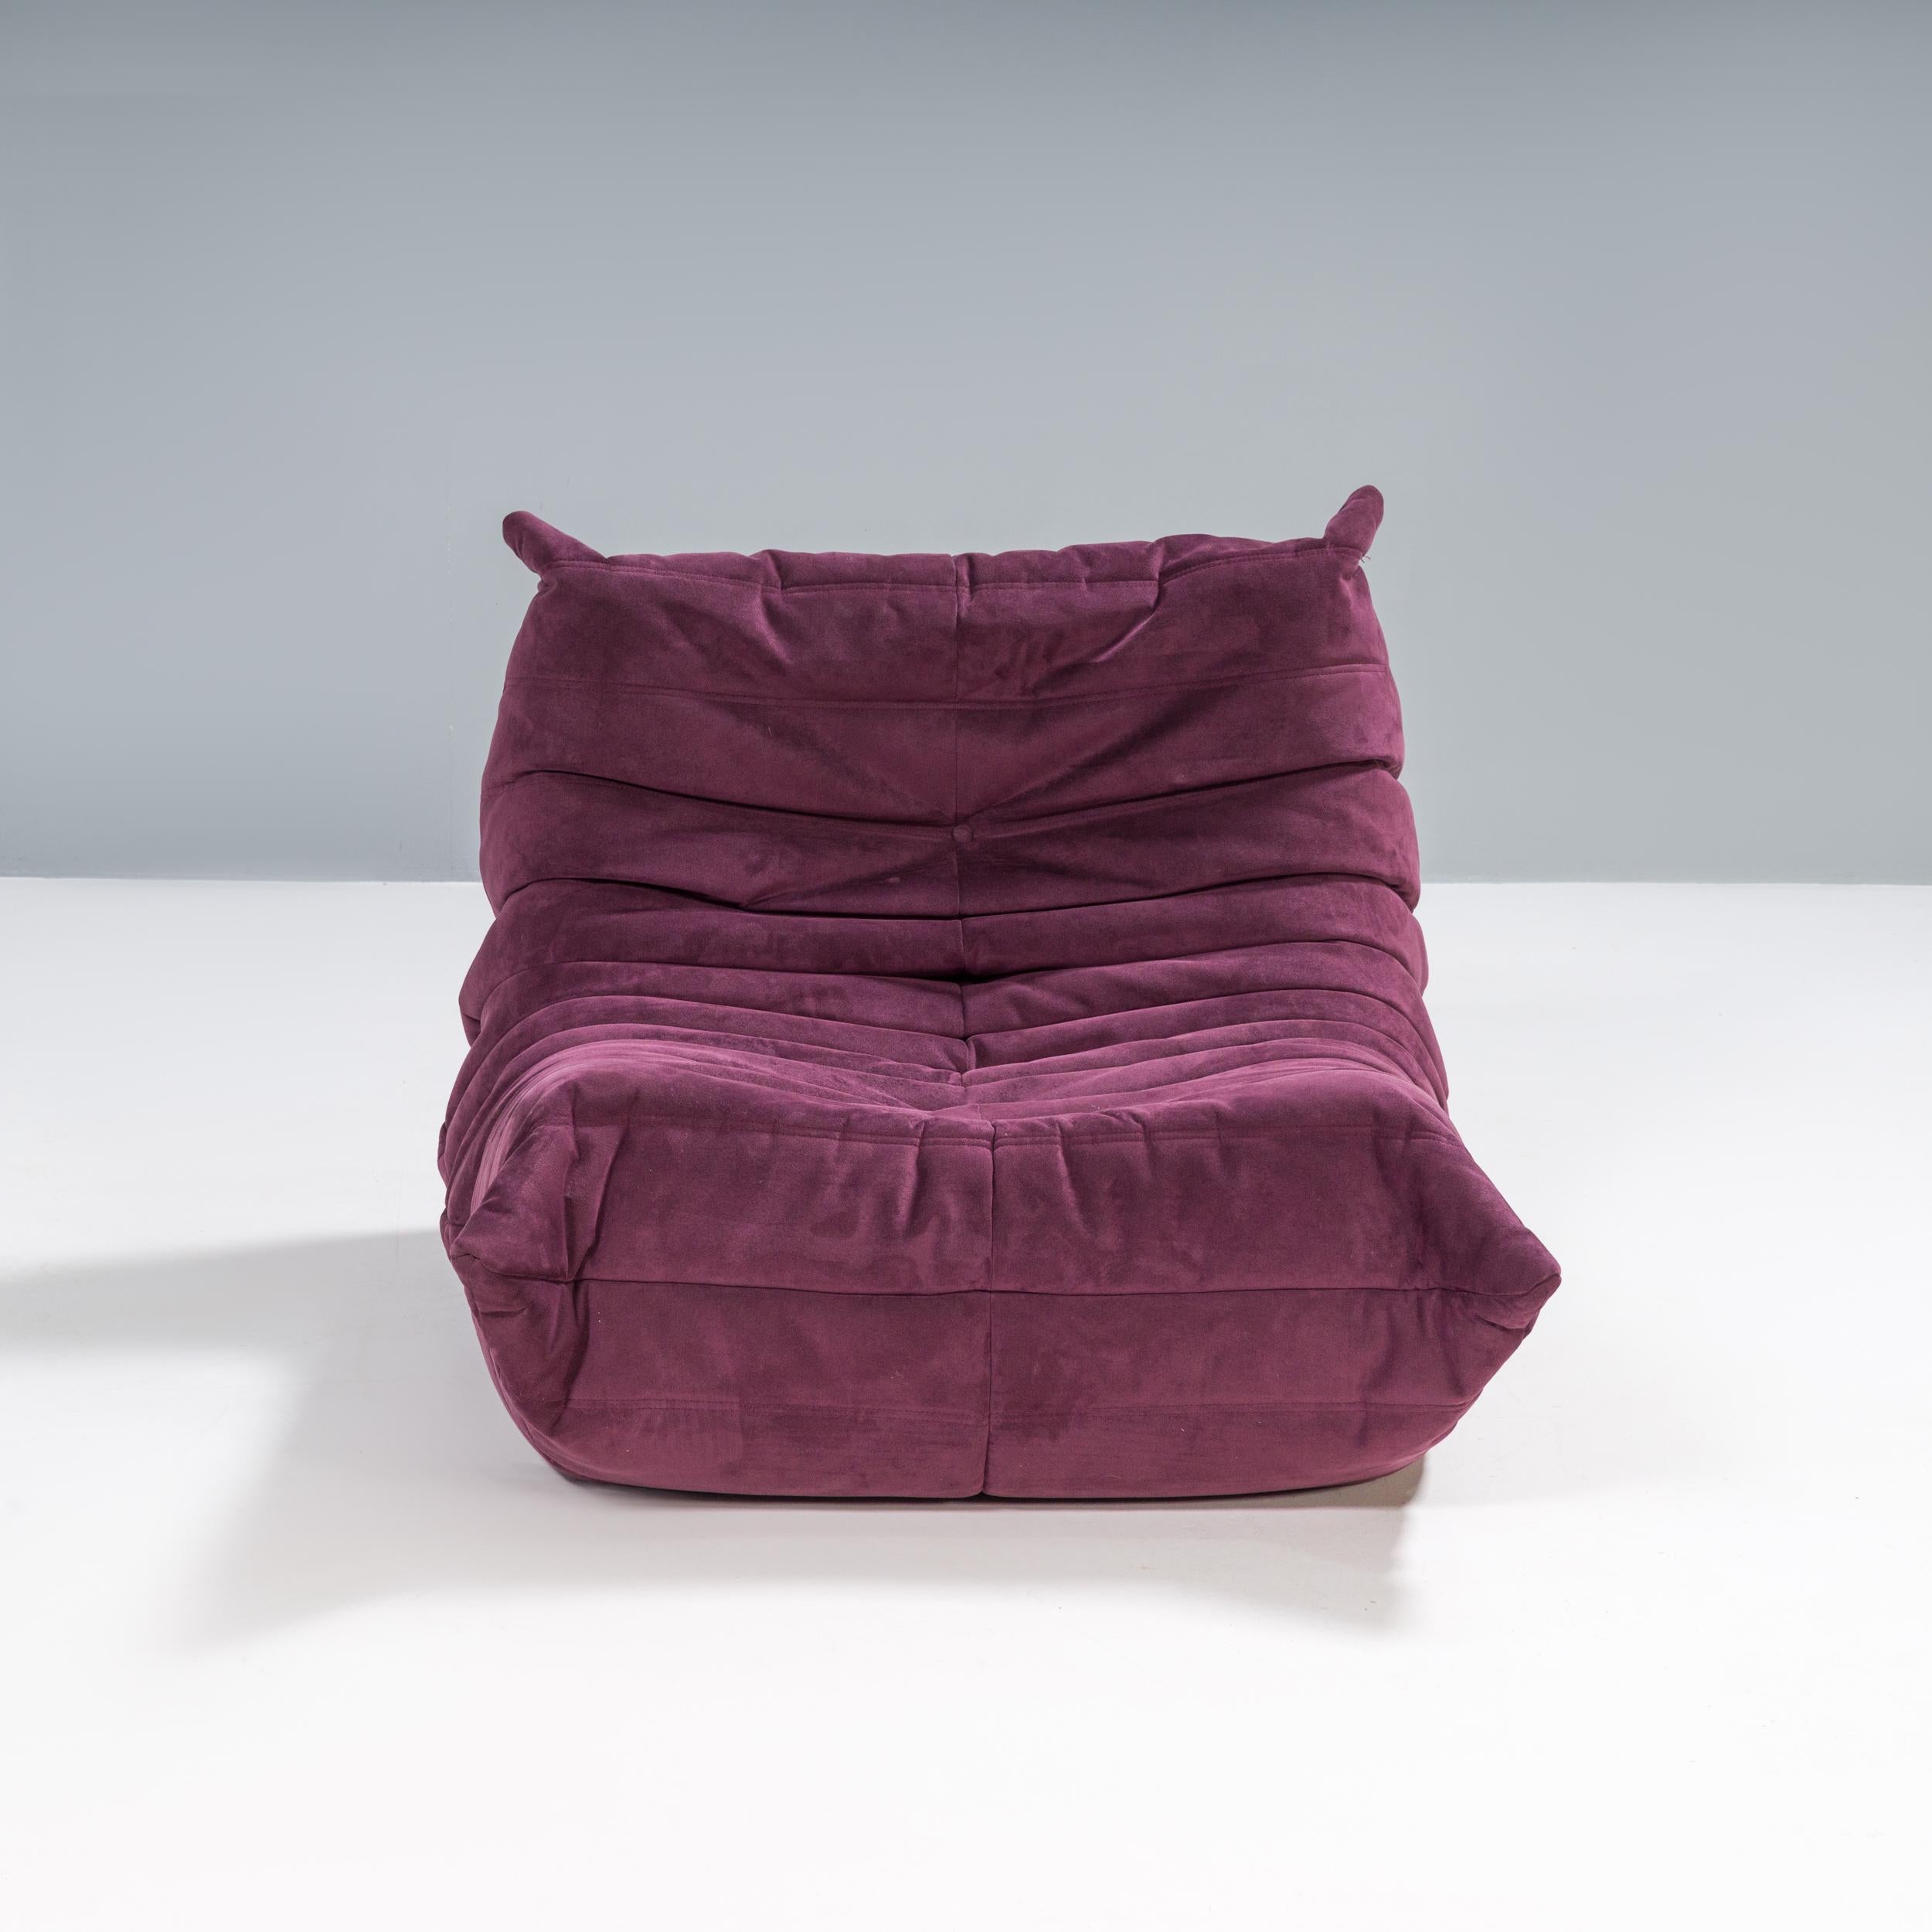 The iconic Togo sofa, originally designed by Michel Ducaroy for Ligne Roset in 1973, has become a design classic. 

This armchair is covered in aubergine fabric and features the instantly recognisable pleated fabric design, which gives it its